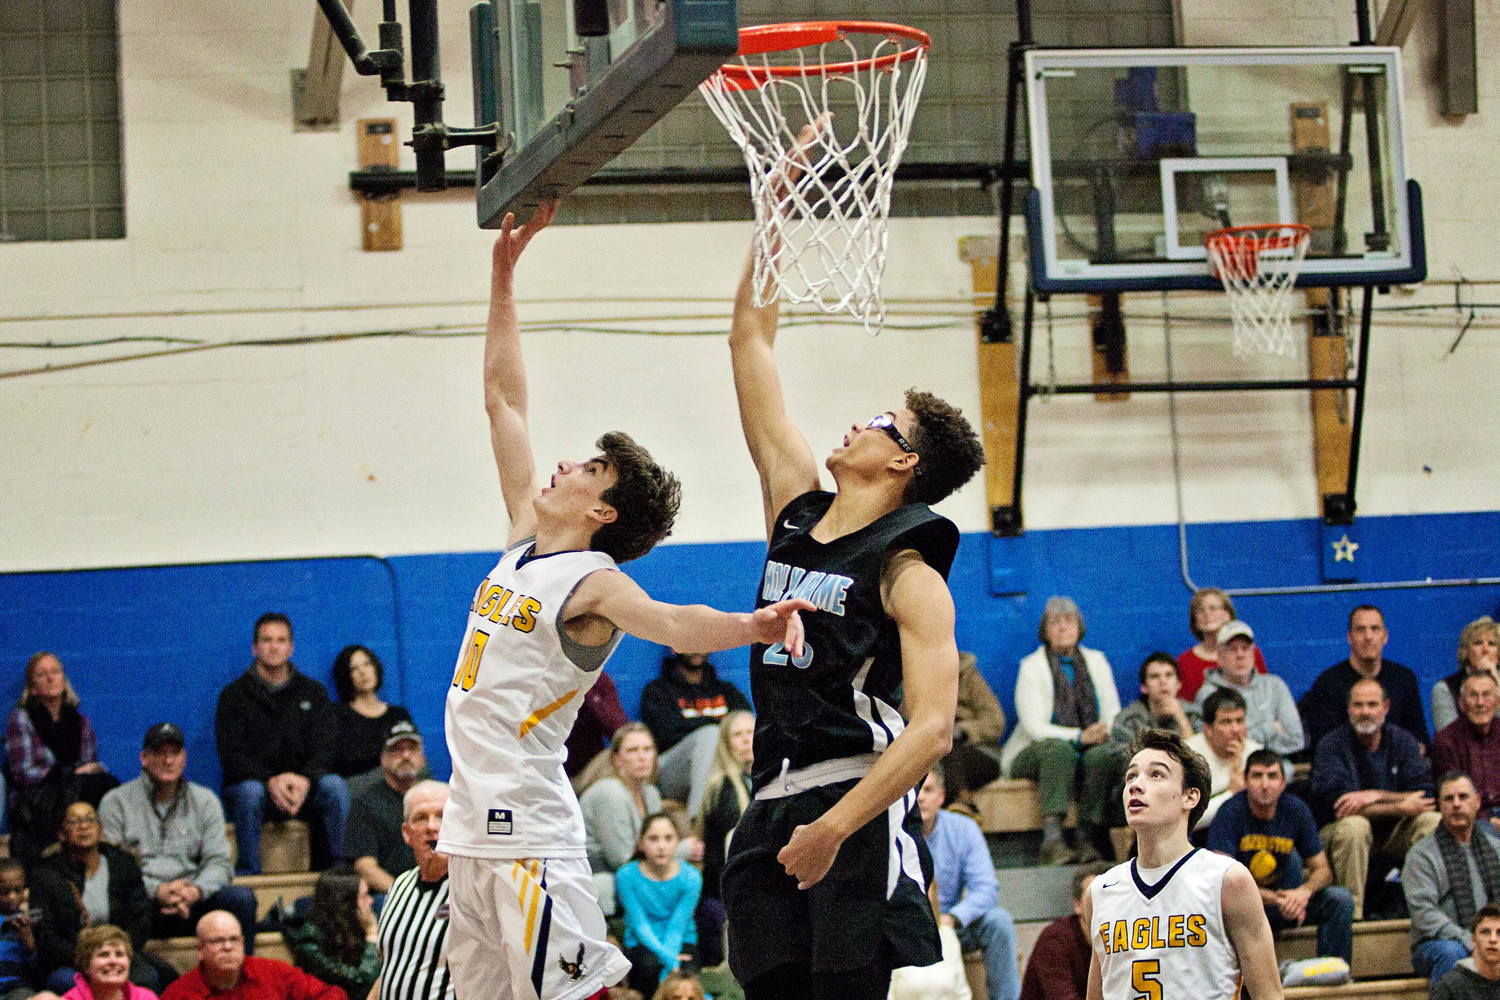 Ryan Bonneau lays the ball up while a Holy Name player tries to block the shot.